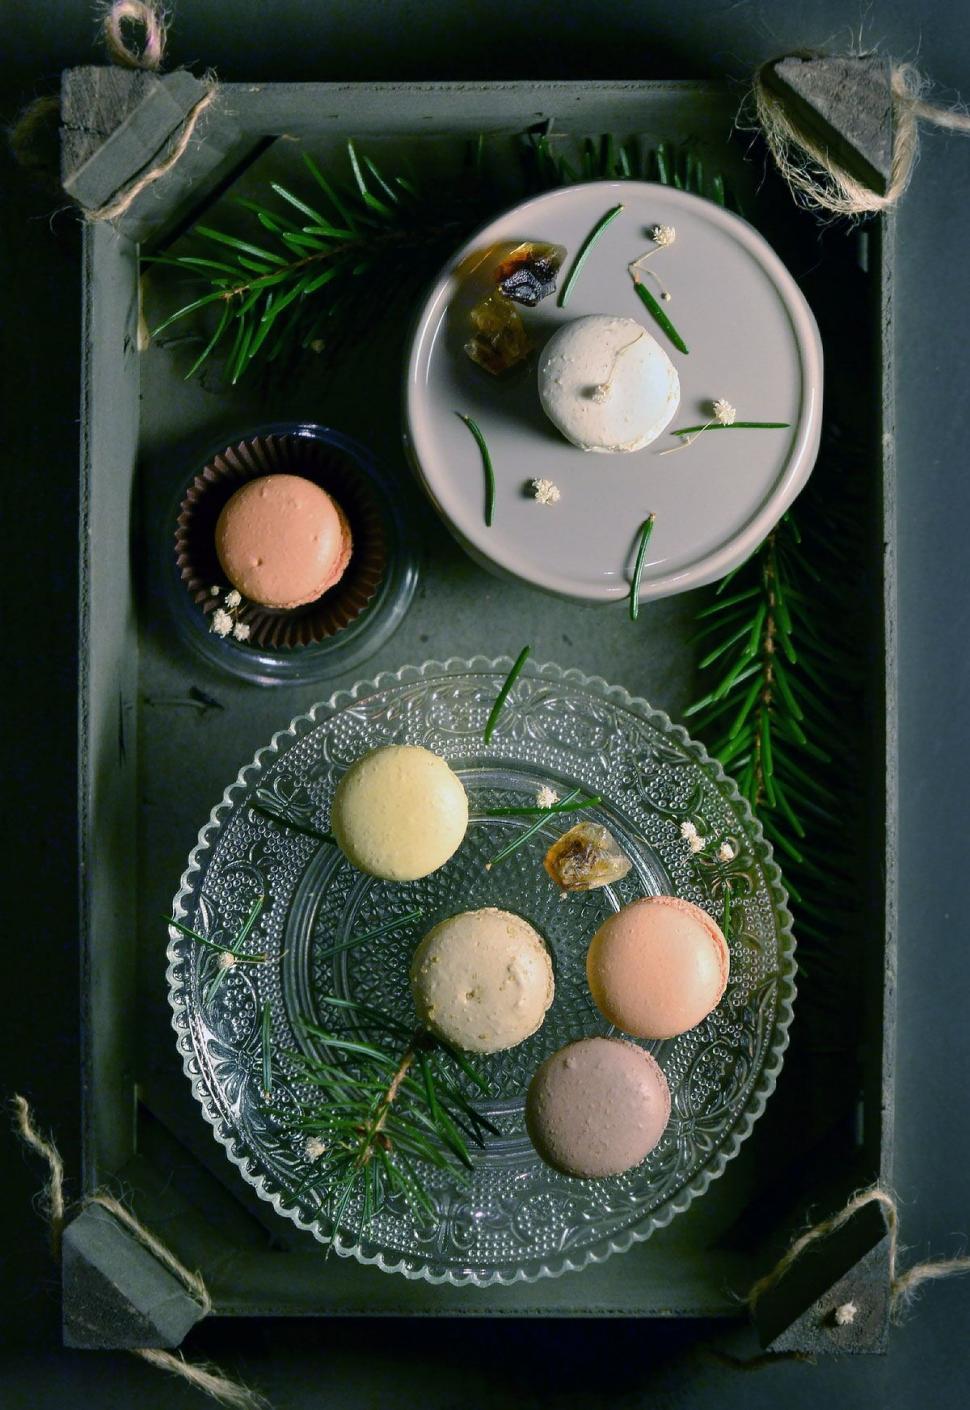 Free Image of Assorted macarons in a vintage setting 